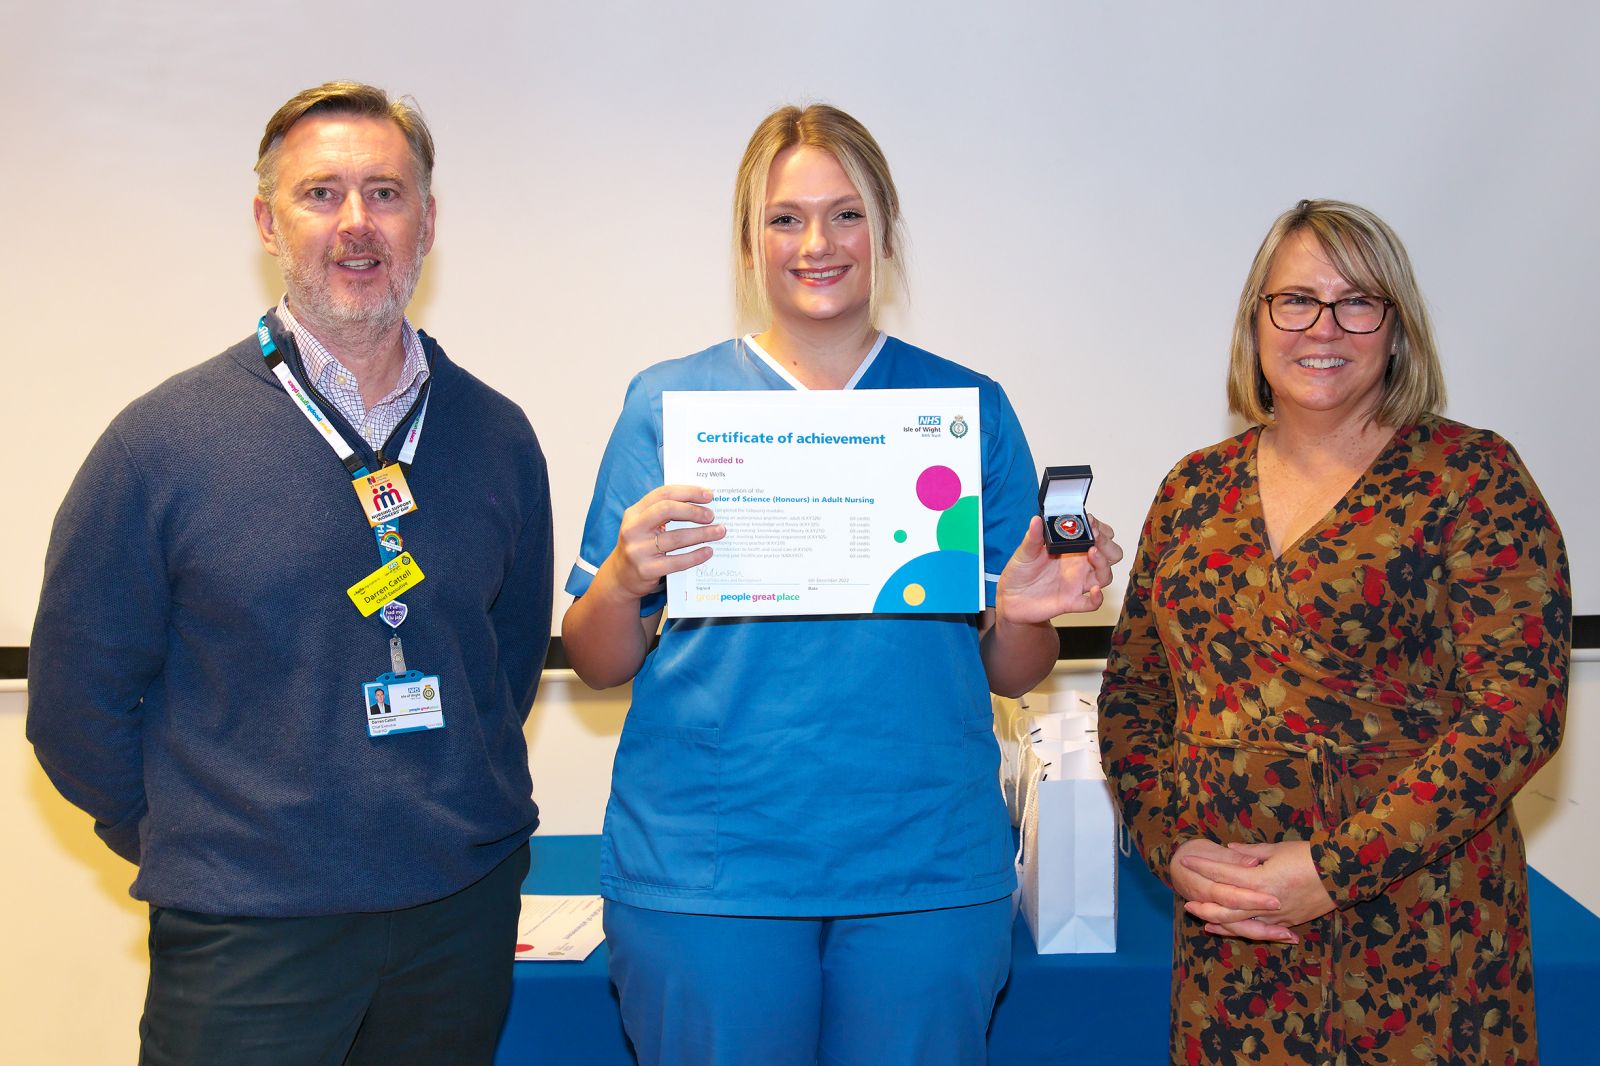 •	Darren Cattell, CEO Isle of Wight NHS Trust (LHS), Isobel Wells, Registered Nurse (Centre), Juliet Pearce, Director of Nursing, Midwifery and AHPs Isle of Wight NHS Trust (RHS)